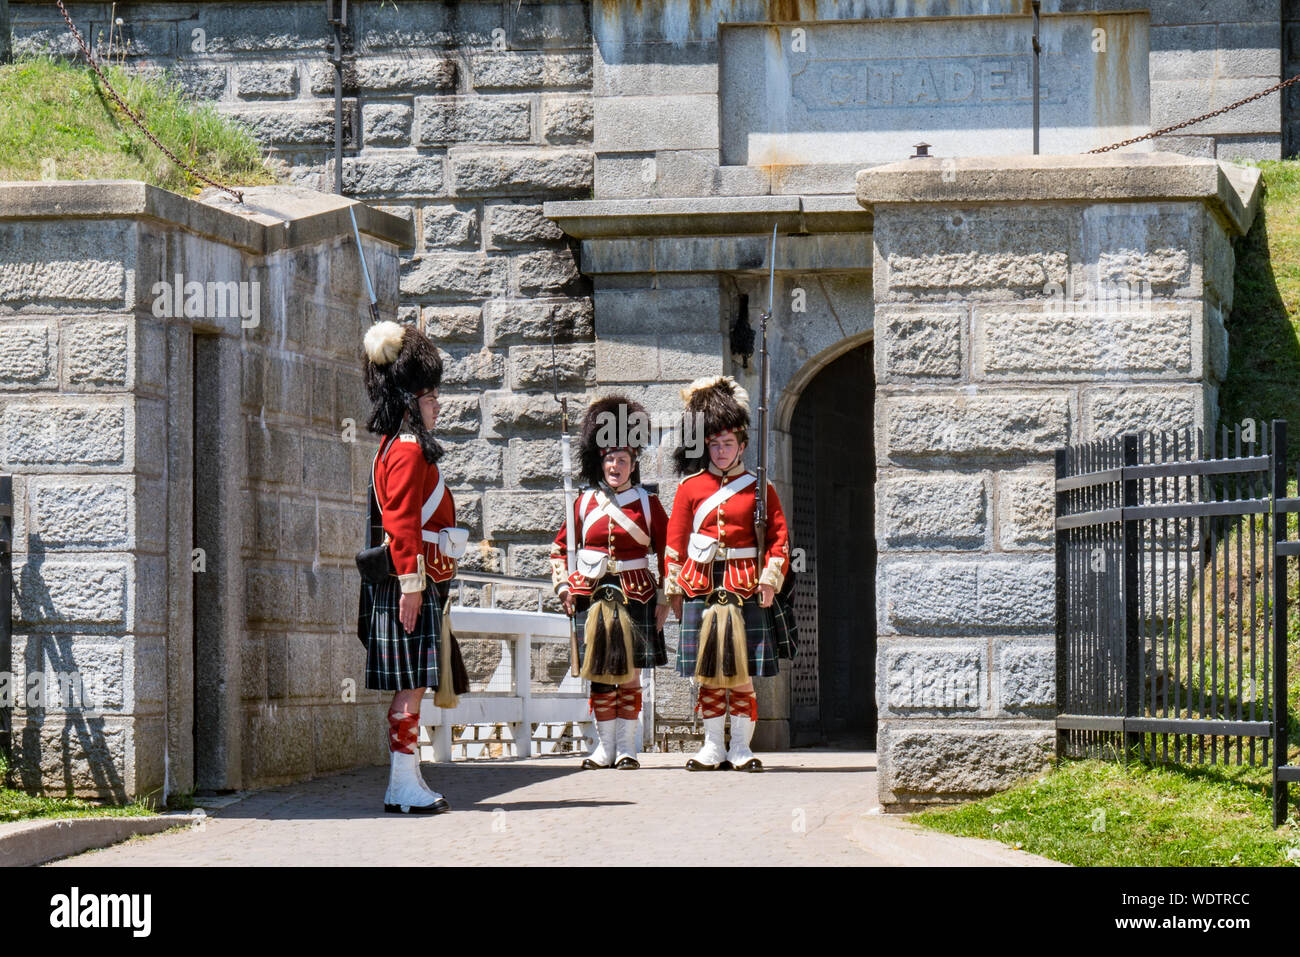 Halifax, Canada - June 19, 2019: Changing of the guard at the Halifax Citadel in Nova Scotia, Canada Stock Photo